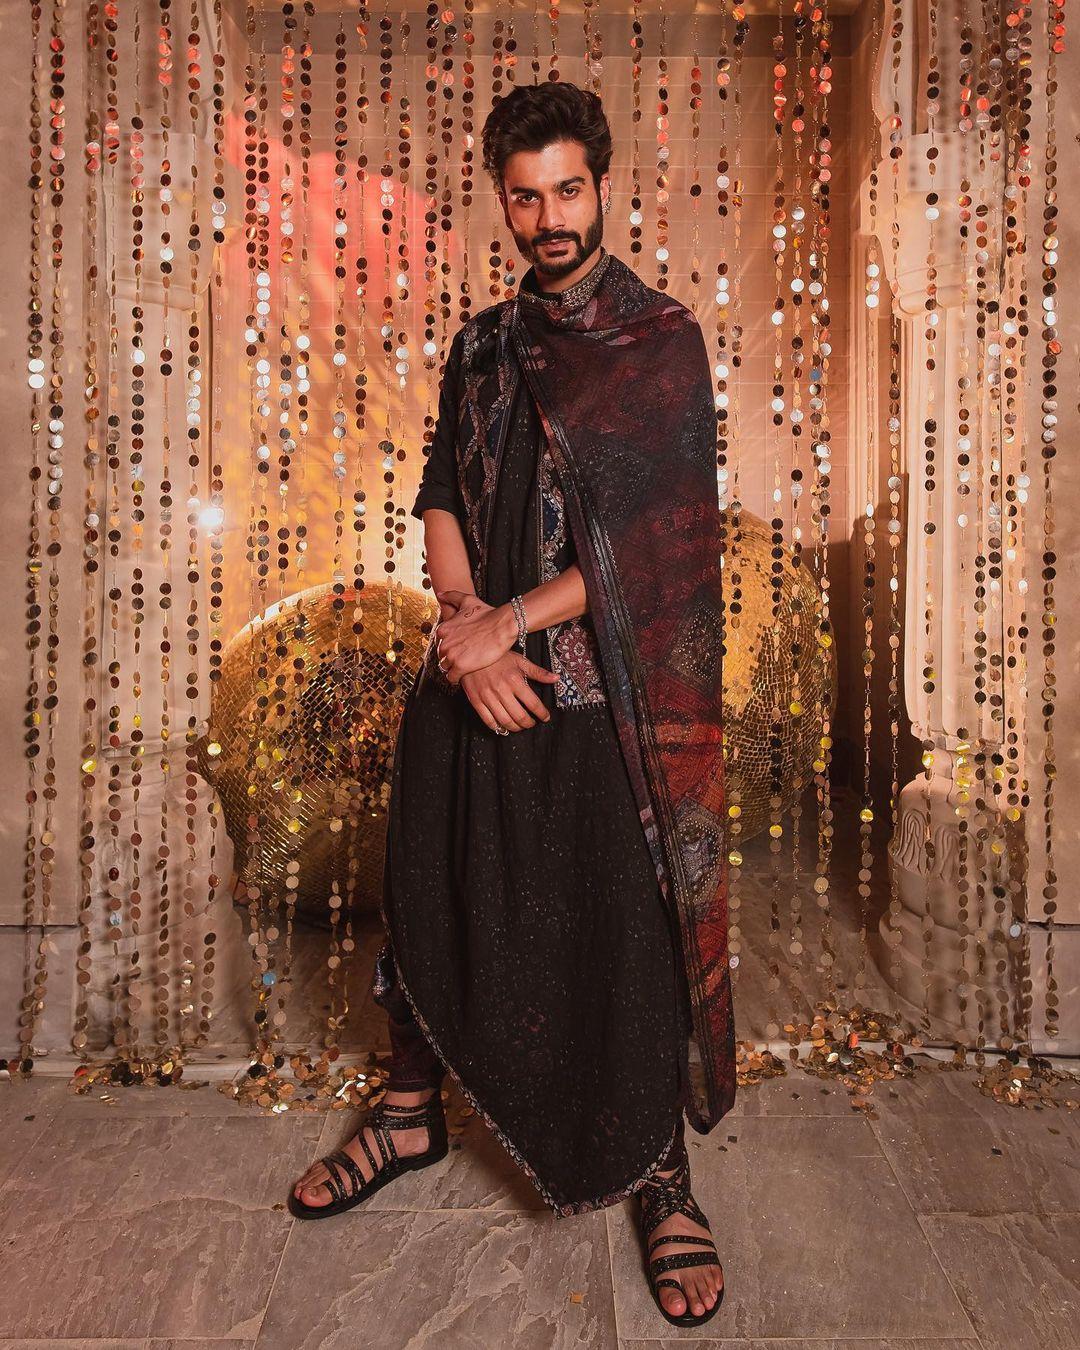 Unique Menswear For Engagement Spotted At Real Weddings | Wedding dresses  men indian, Wedding outfit men, Wedding dress men